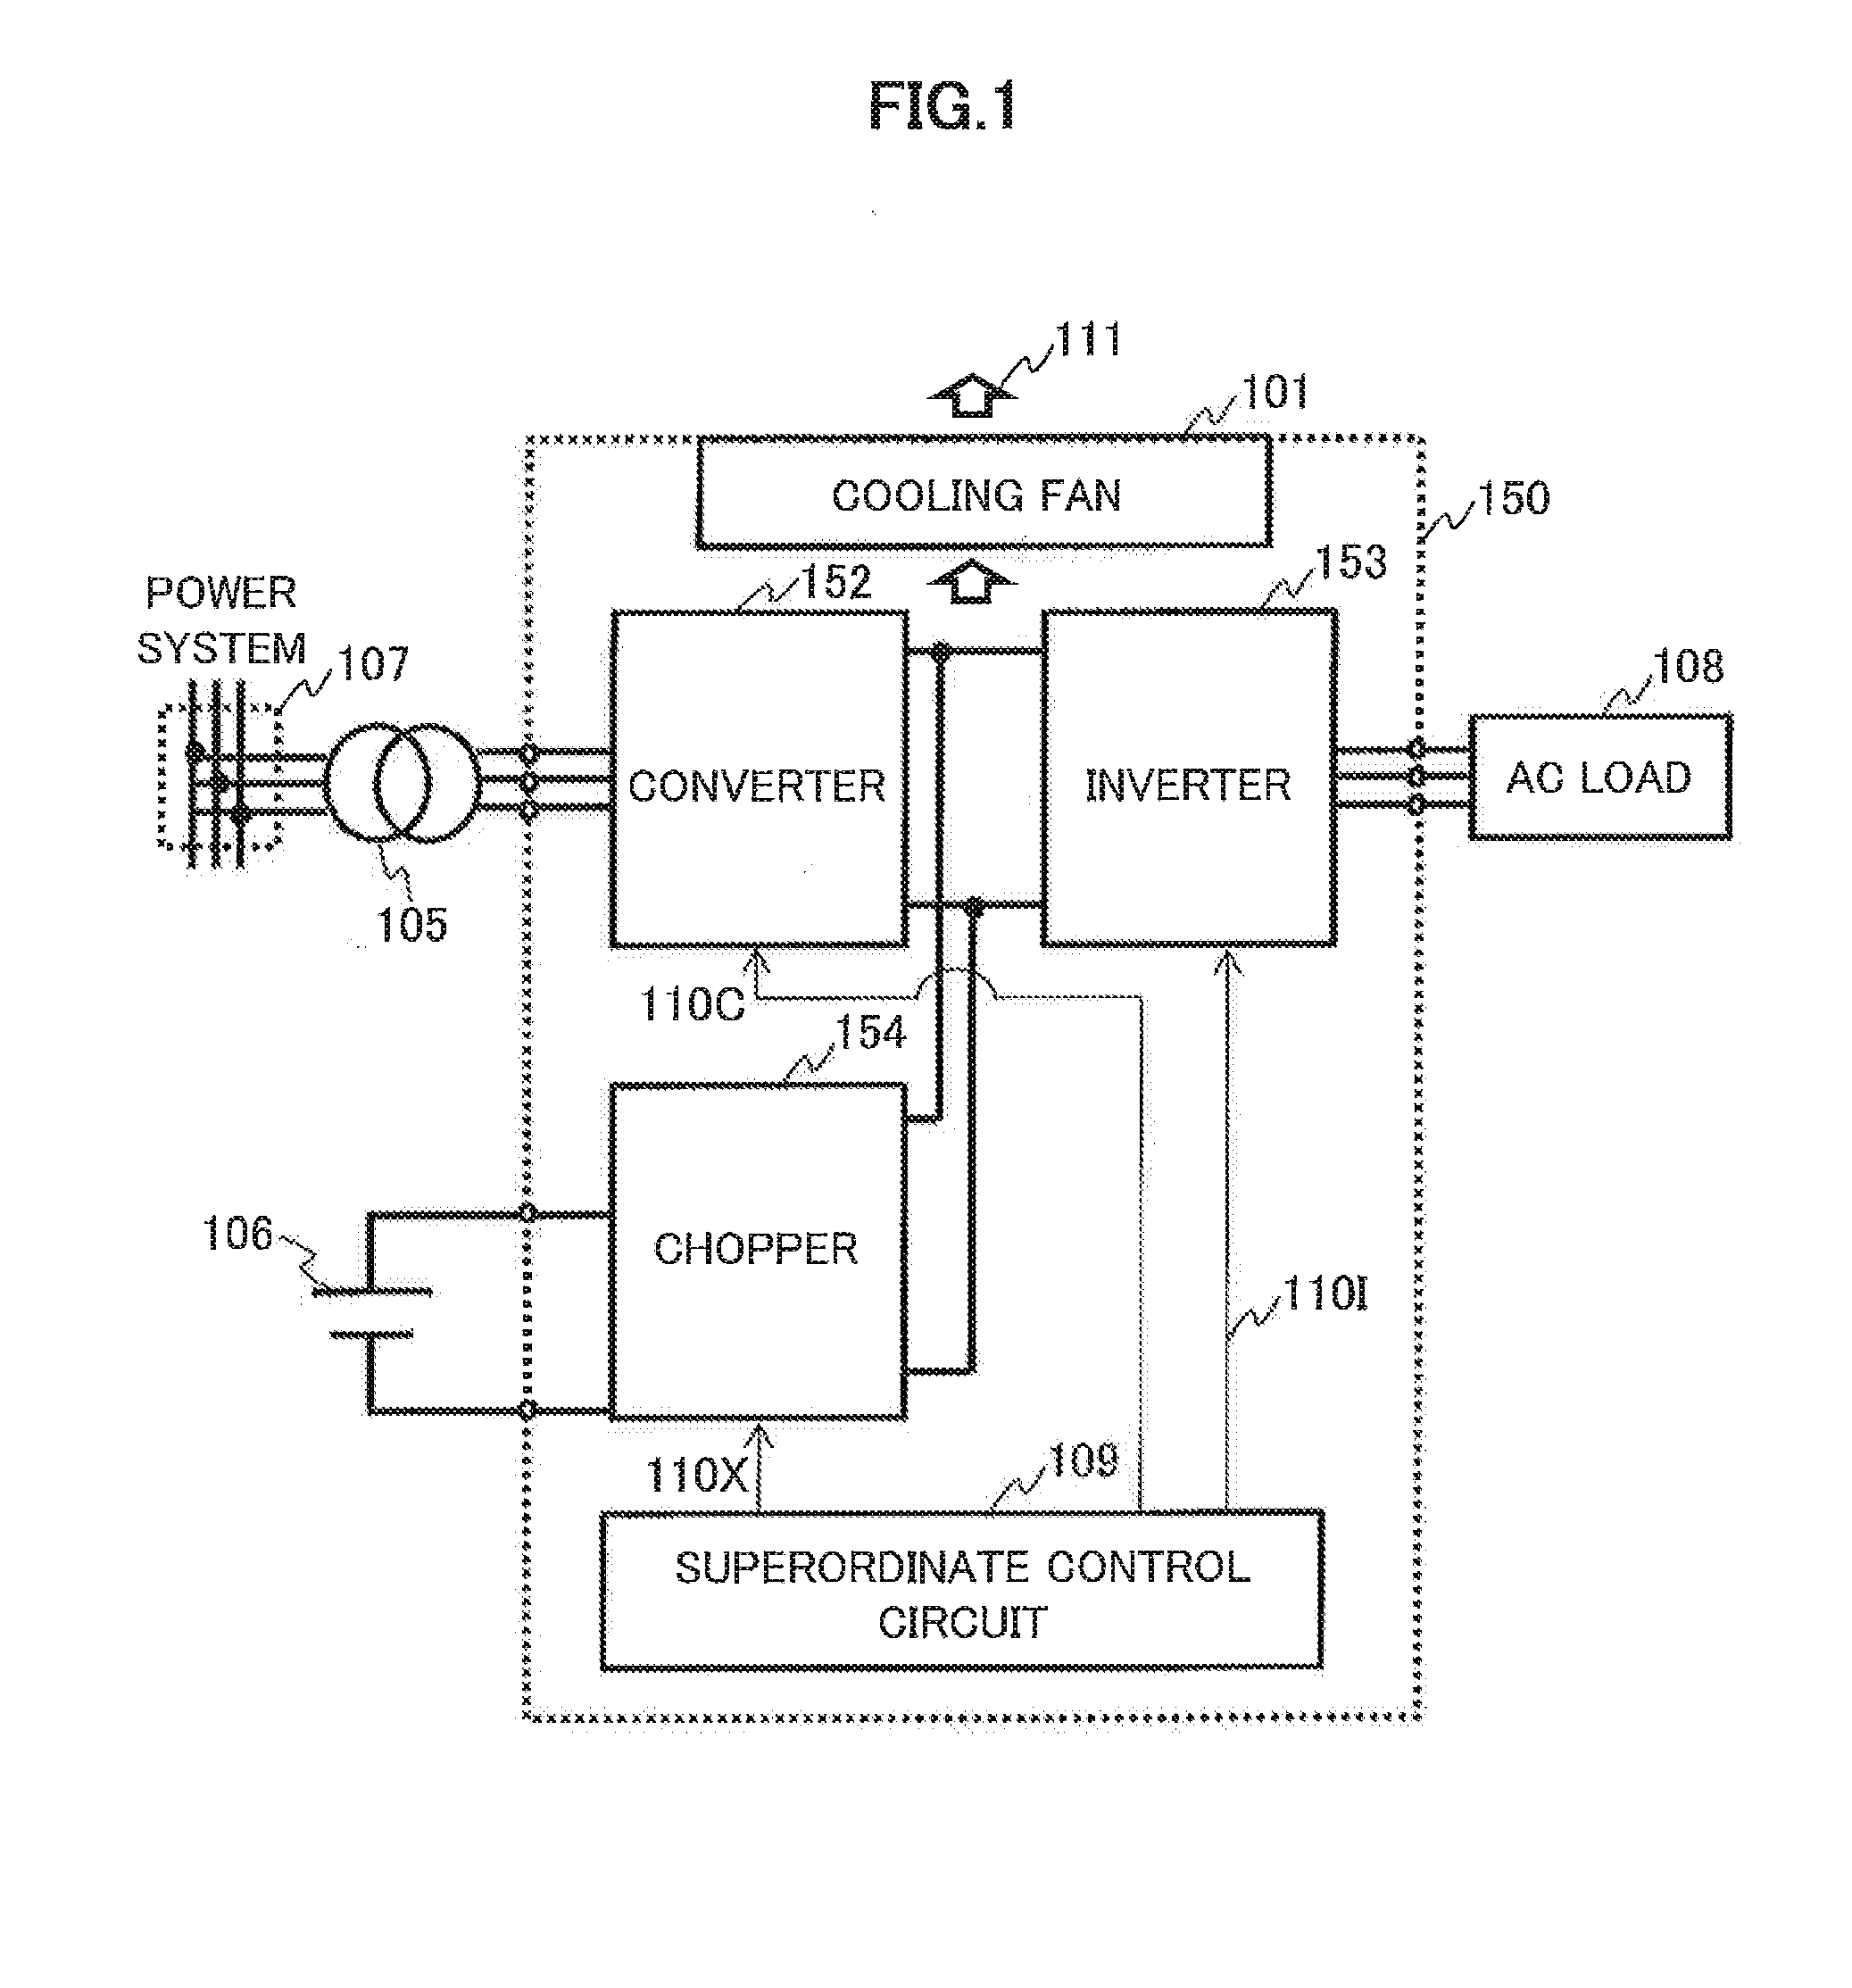 Cooling Structure of Heating Element and Power Conversion Device